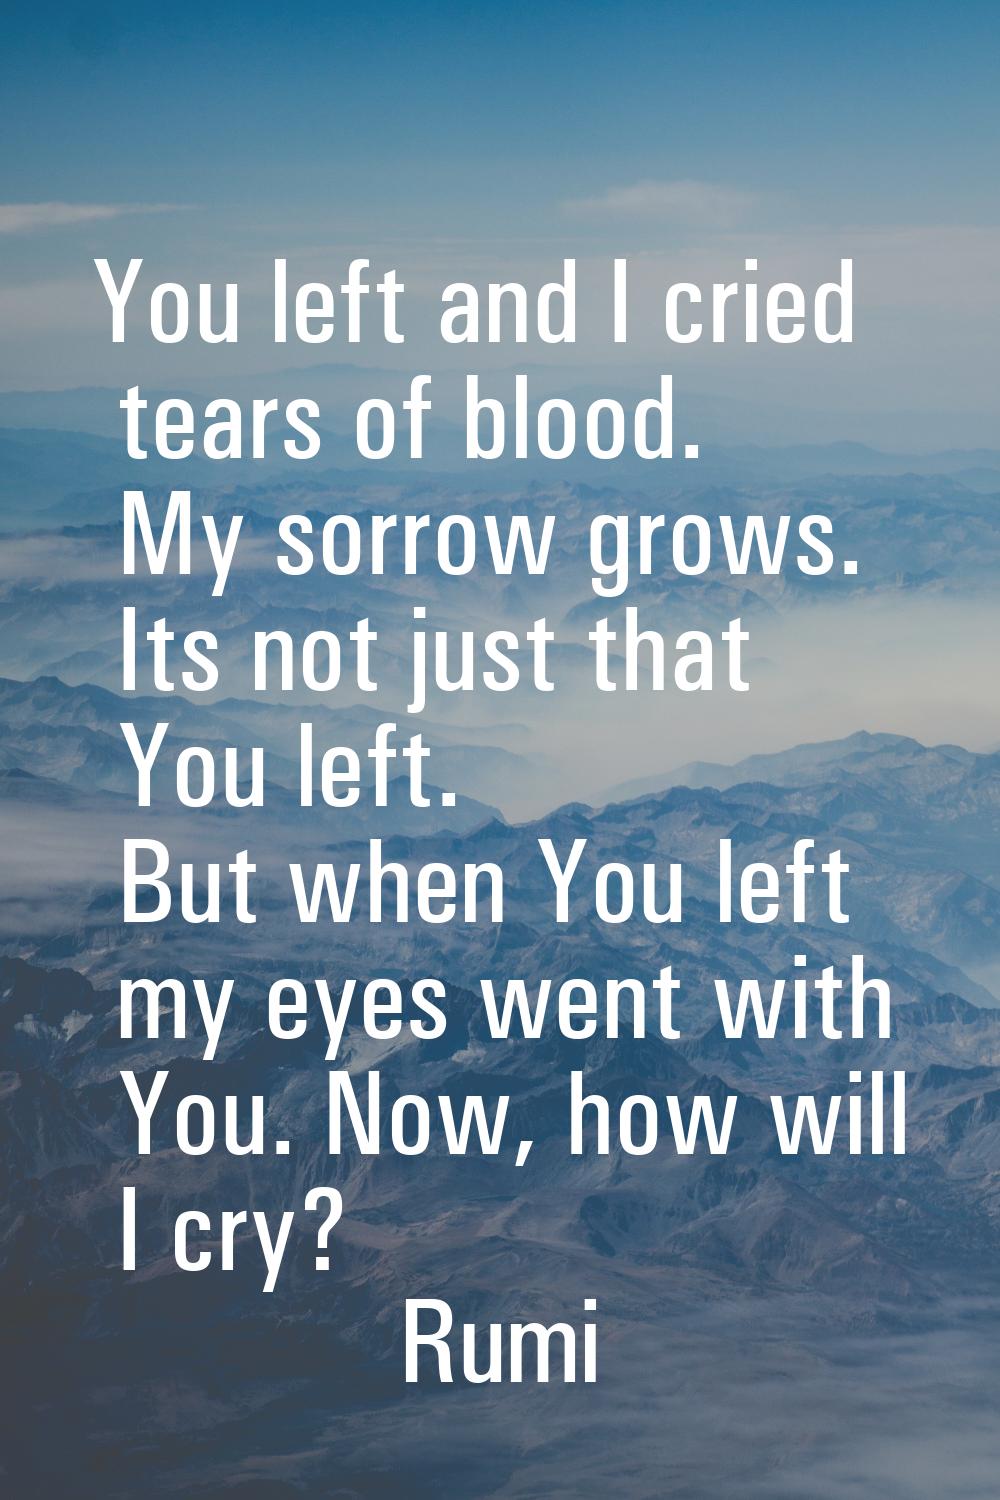 You left and I cried tears of blood. My sorrow grows. Its not just that You left. But when You left